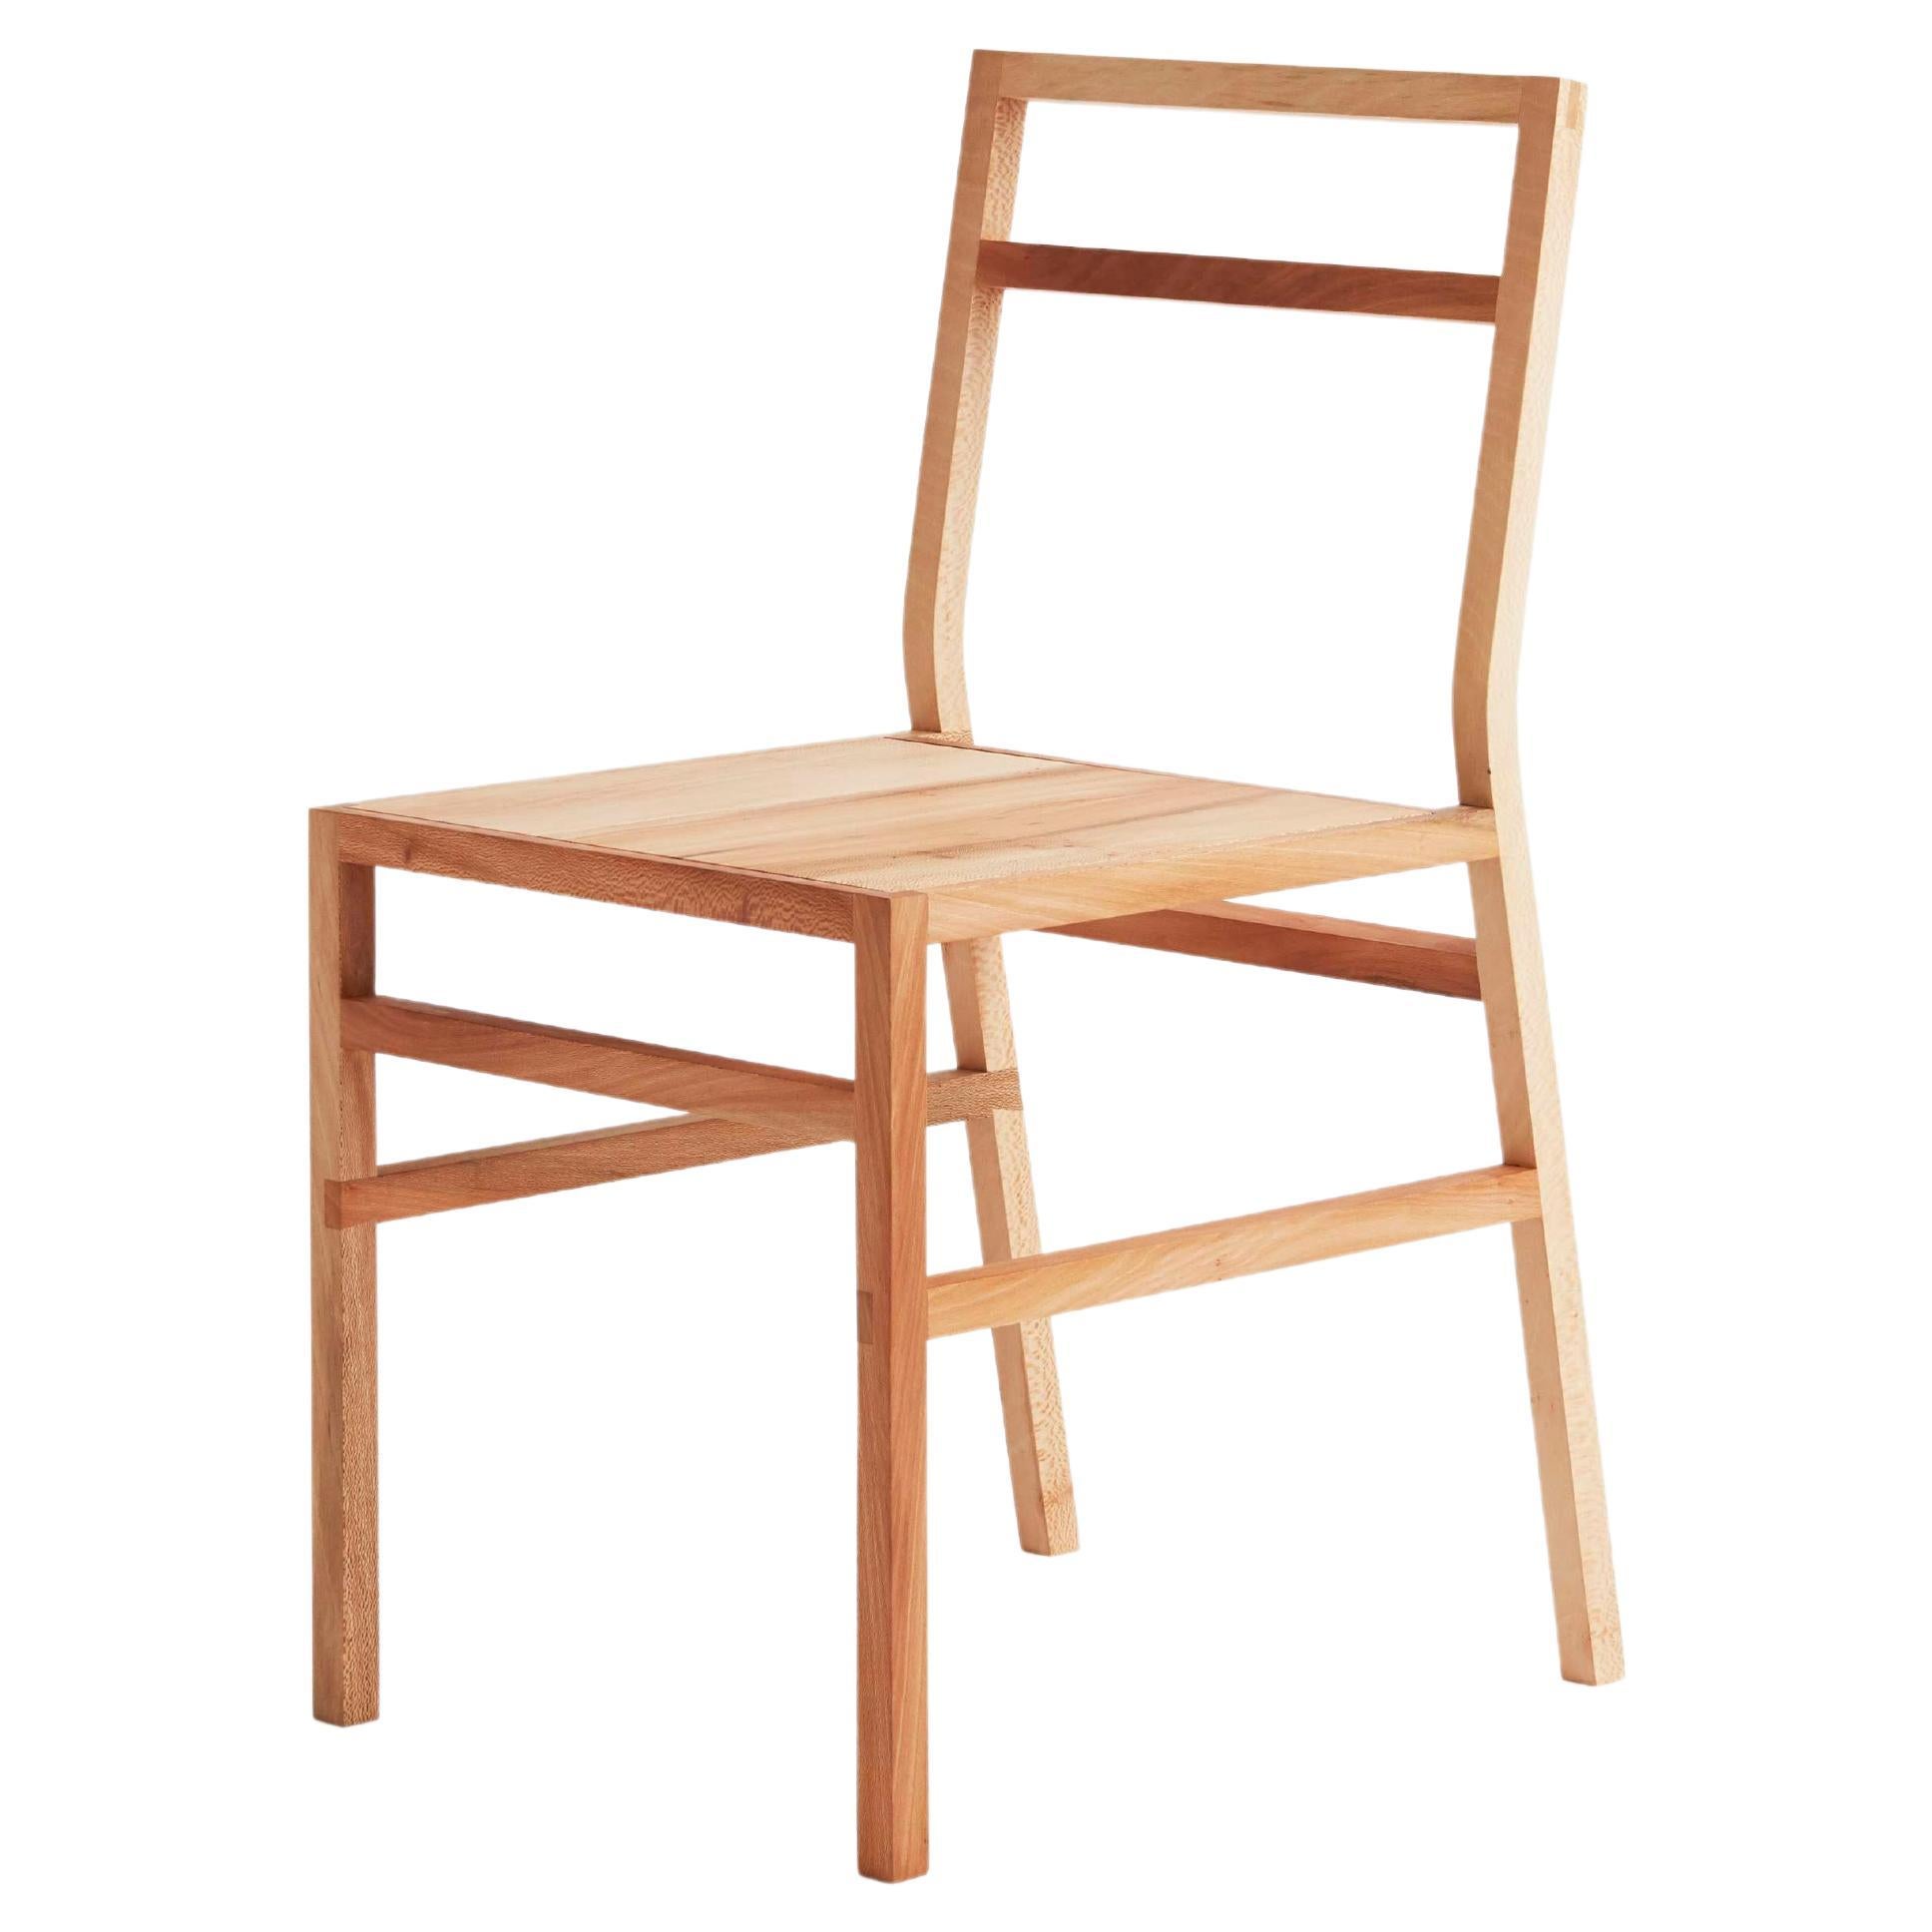 Organic Modern Dining Chair, Solid Wood, London Plane, Handmade by Loose Fit, UK For Sale